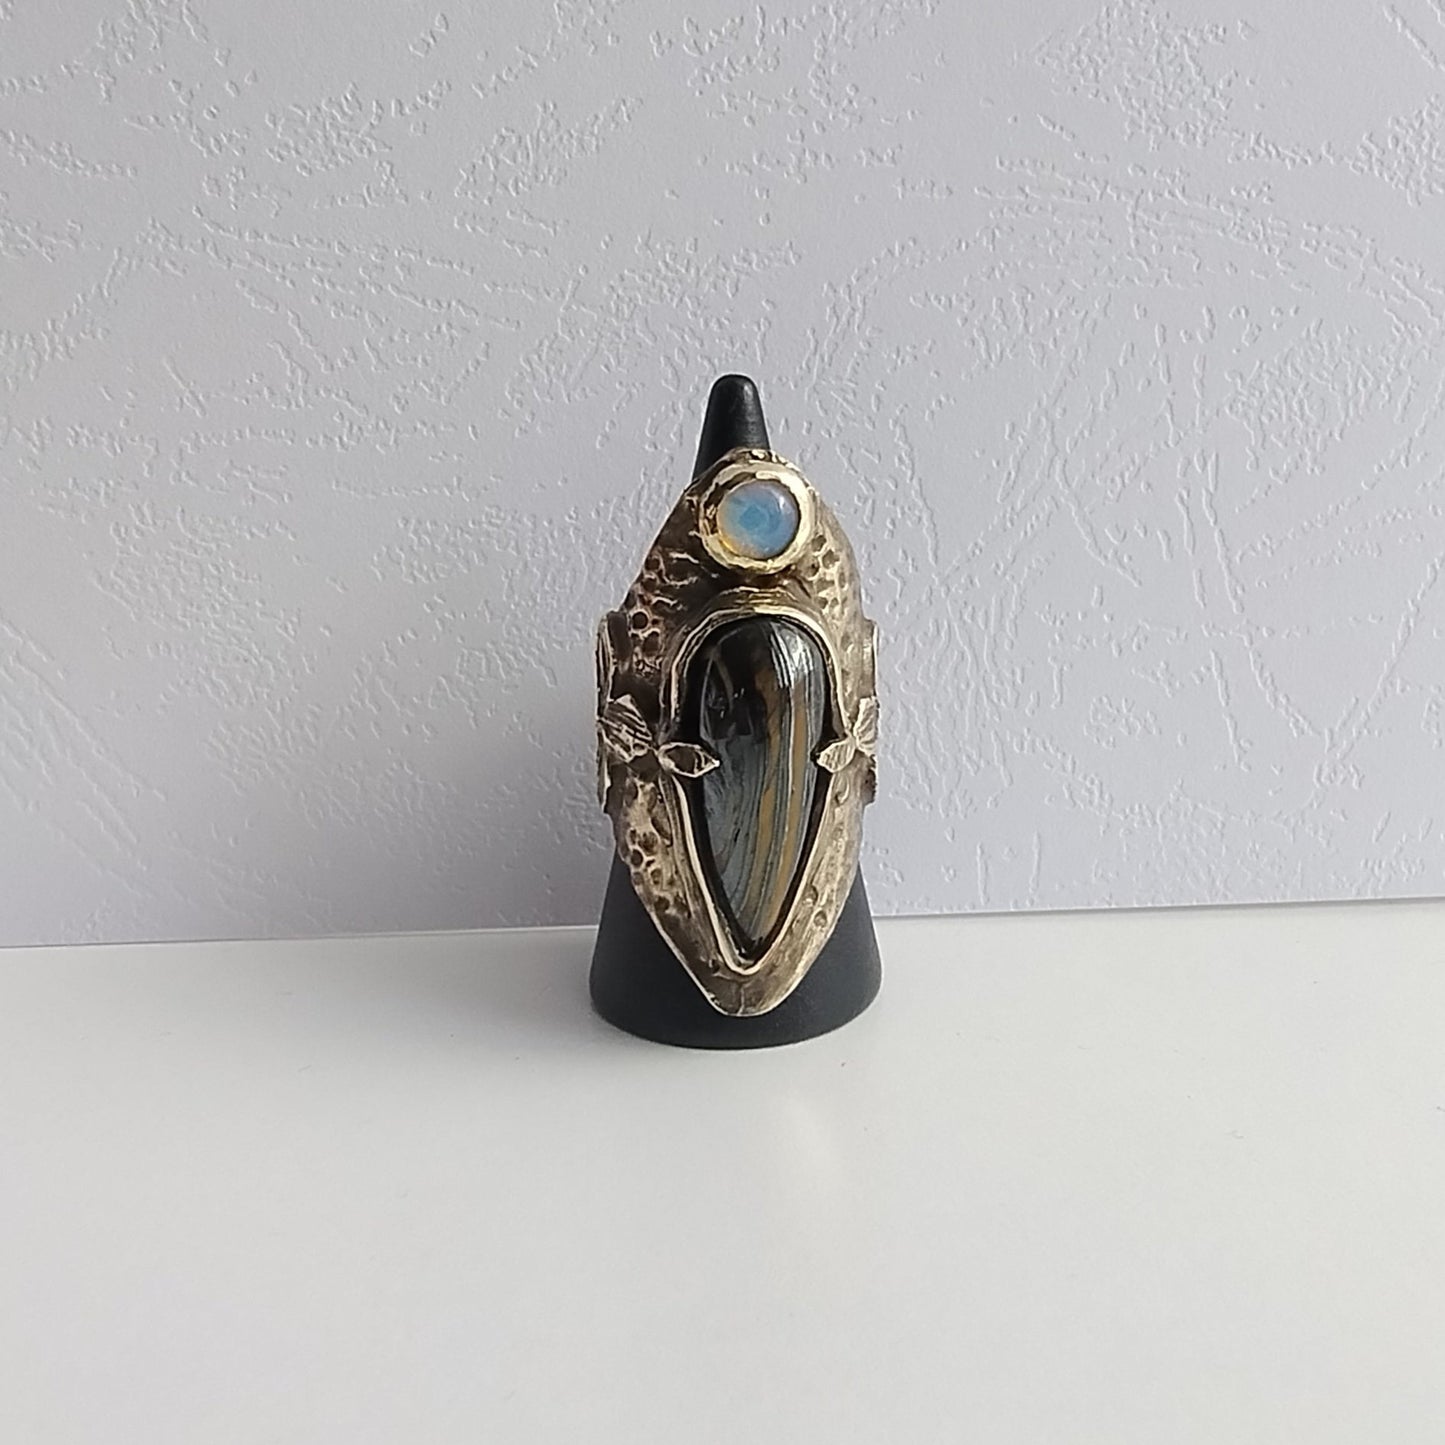 Antique massive power ring with iron tiger and opalite LEIA&CO